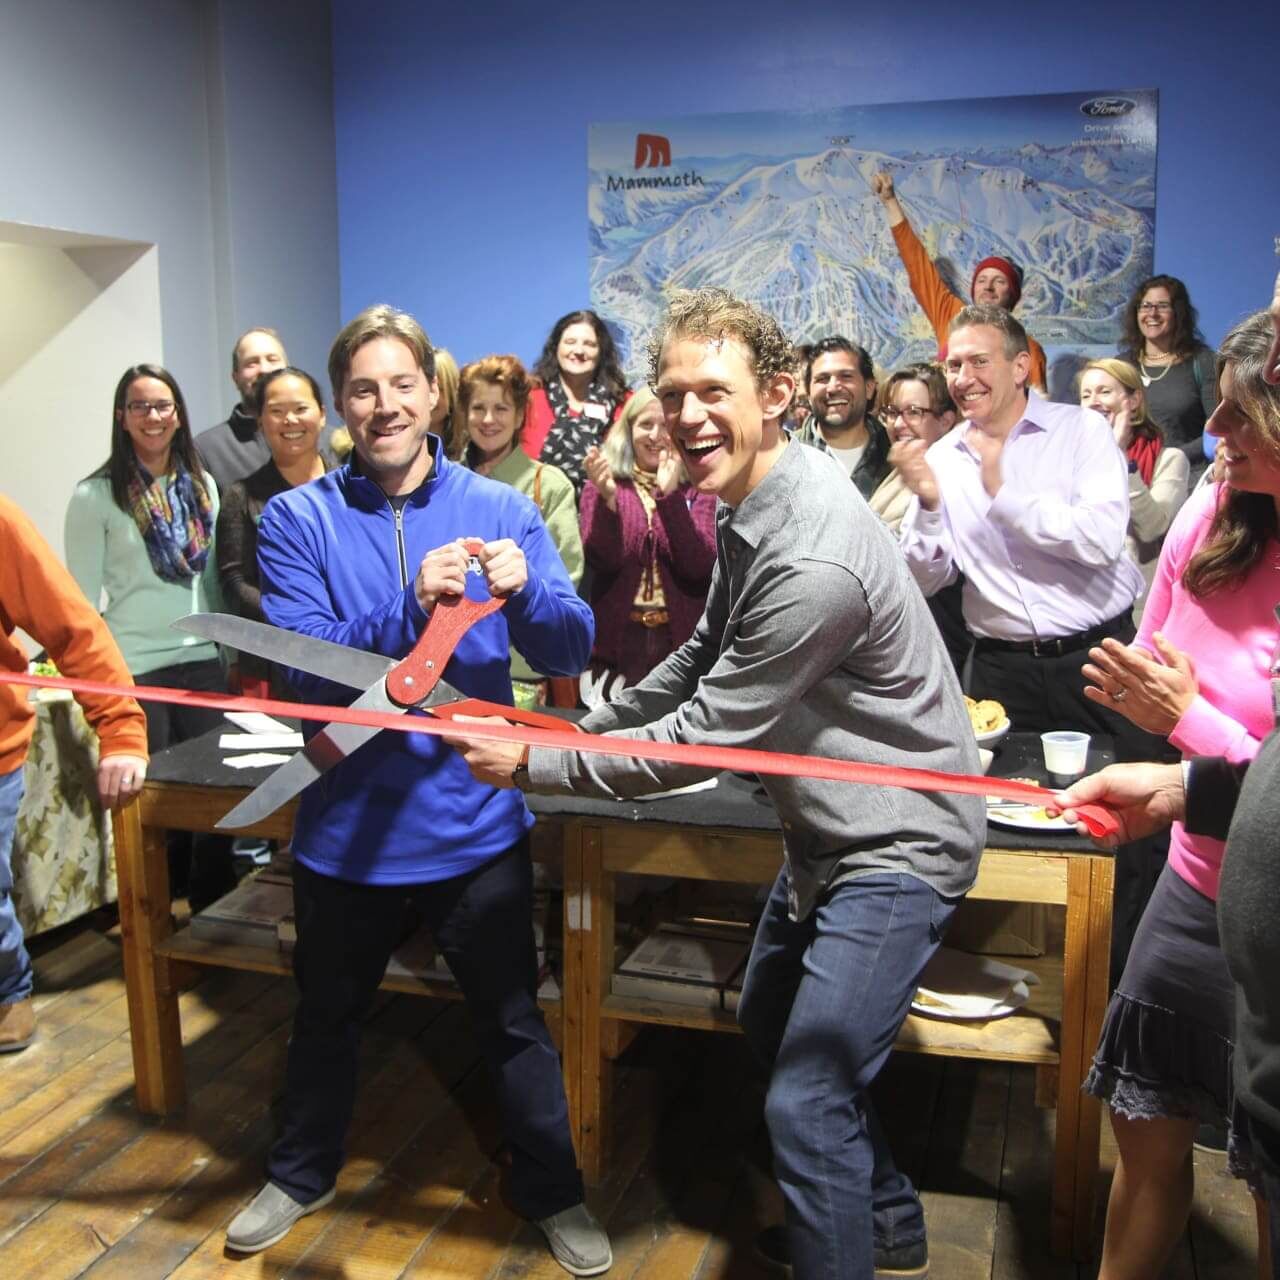 Jeremy Goico and Colin Fernie, owners of Black Tie Ski Rentals, smile as they cut the ribbon with giant scissors for their new shop location on Old Mammoth Road